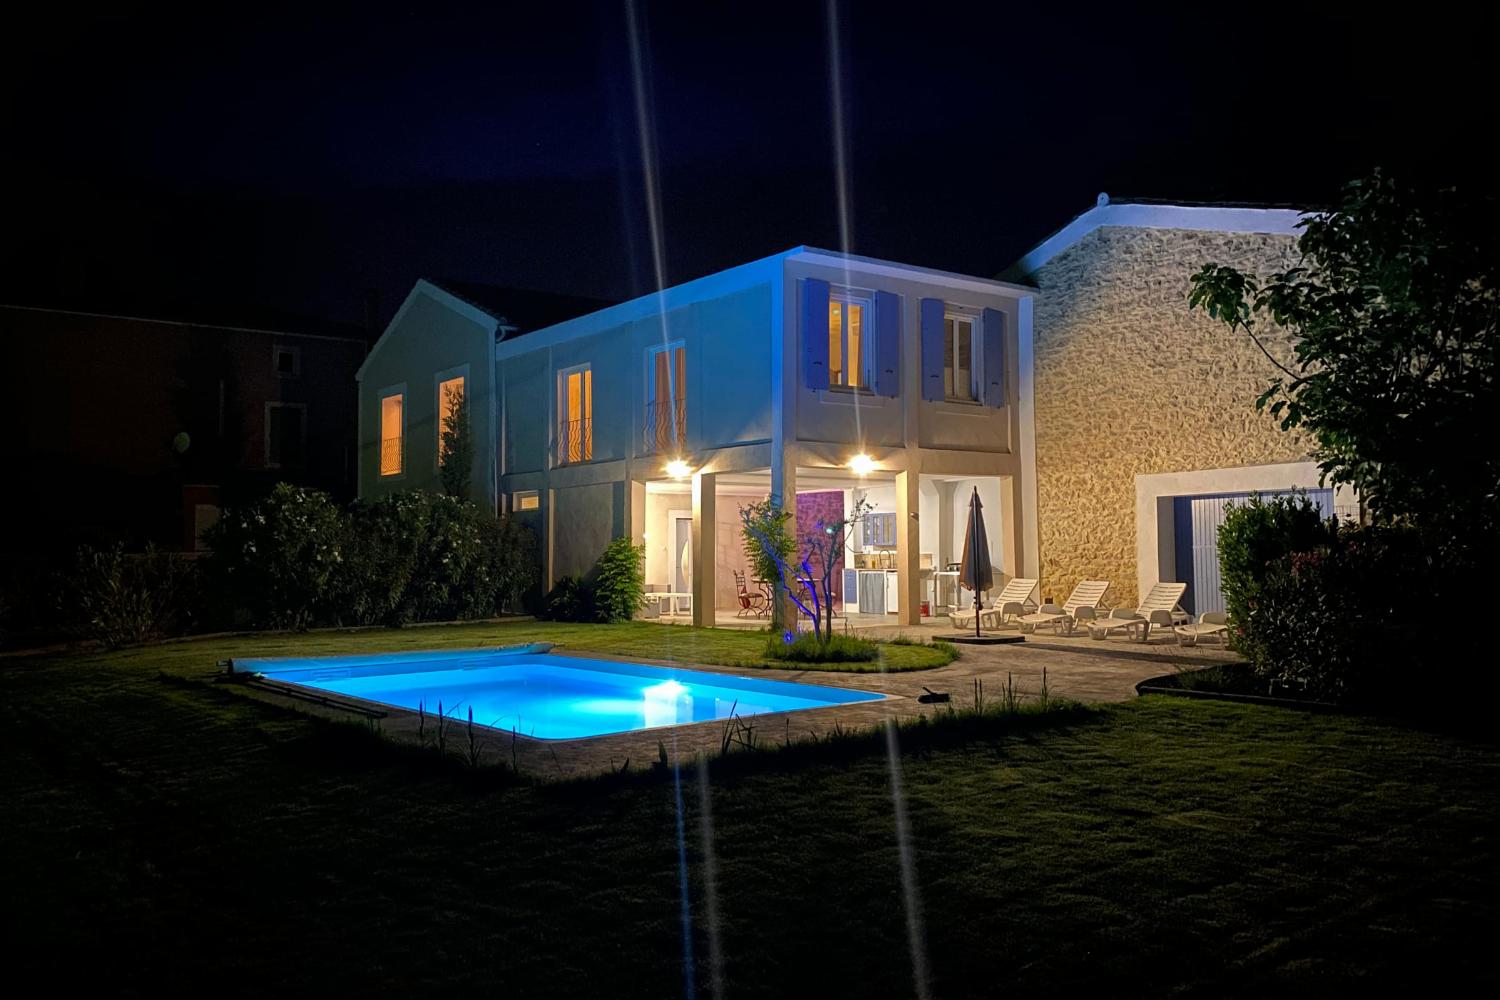 Vacation home in the South of France with private pool at night